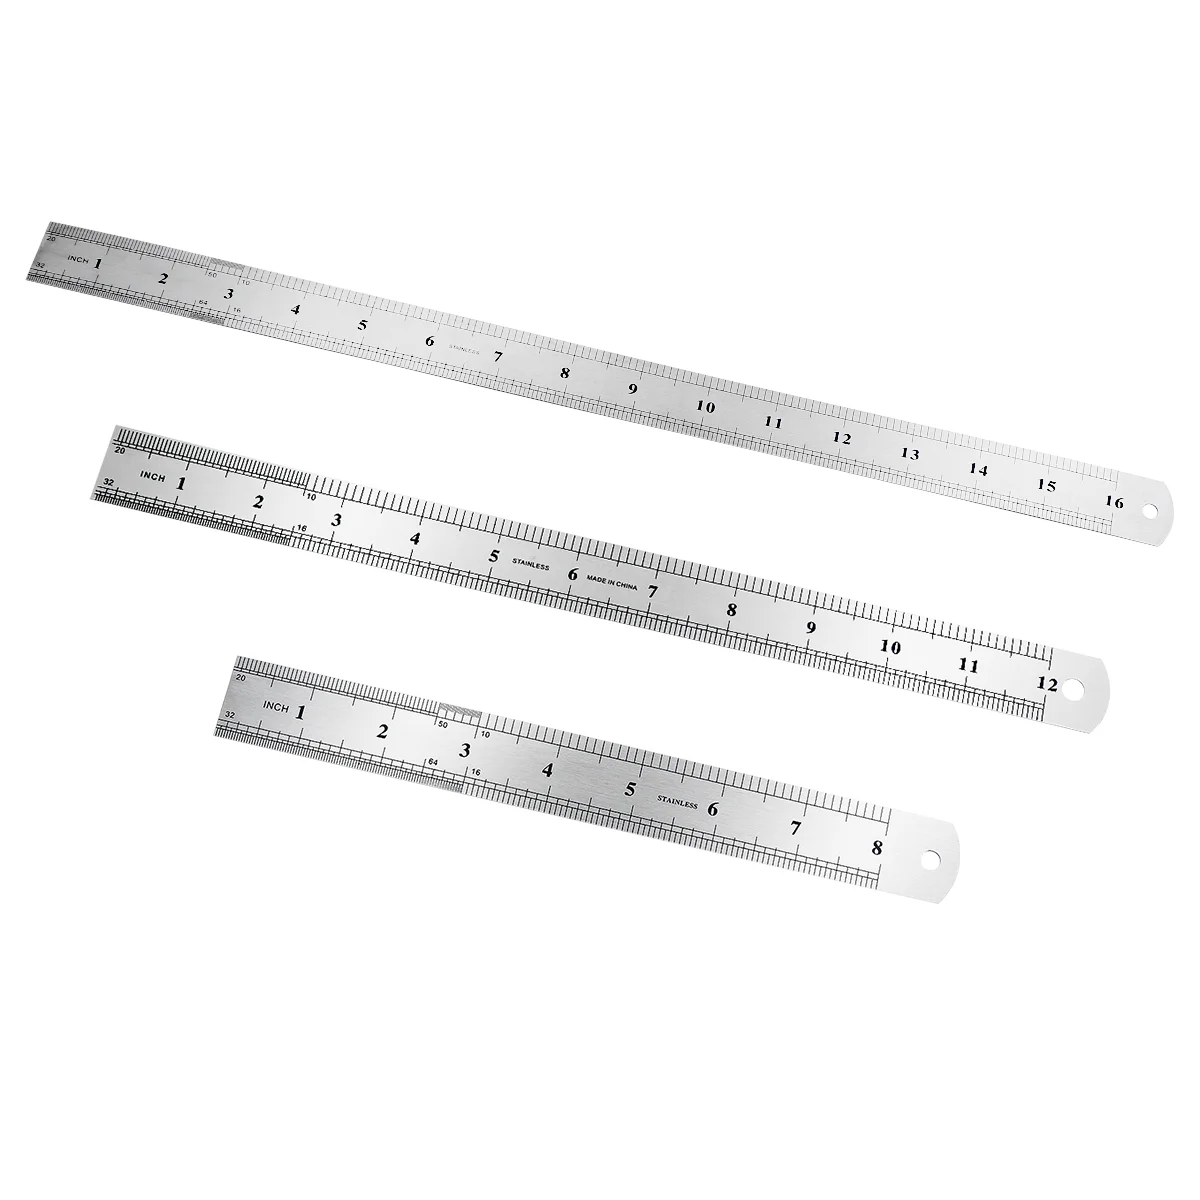 3 Pcs Architect Scale Ruler 40cm Ruler Straight Stainless Steel